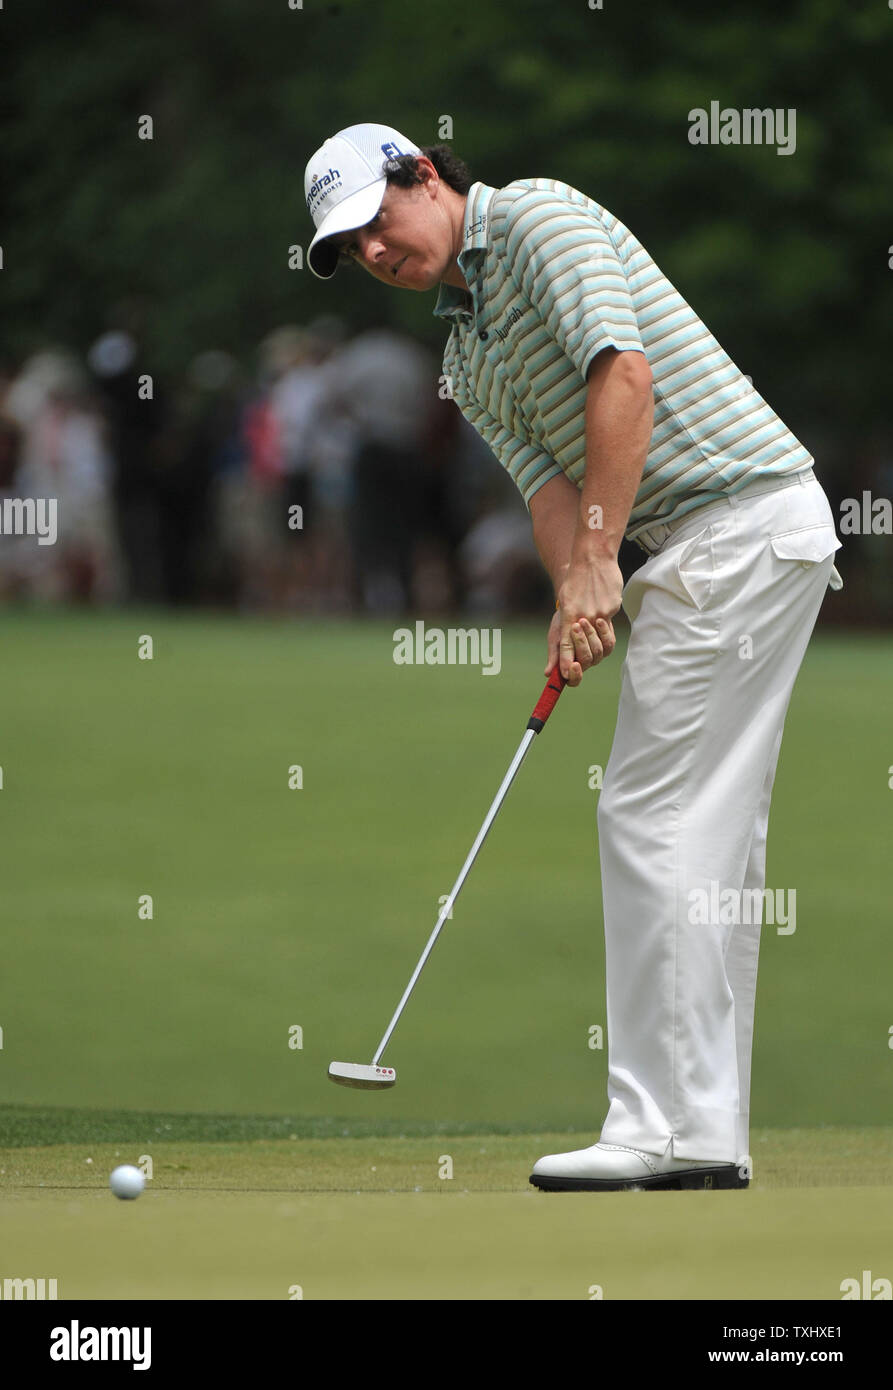 Rory McIlroy putts on the 1st green during the fourth round of the Quail Hollow Tournament in Charlotte, North Carolina on May 2, 2010.   UPI/Kevin Dietsch Stock Photo